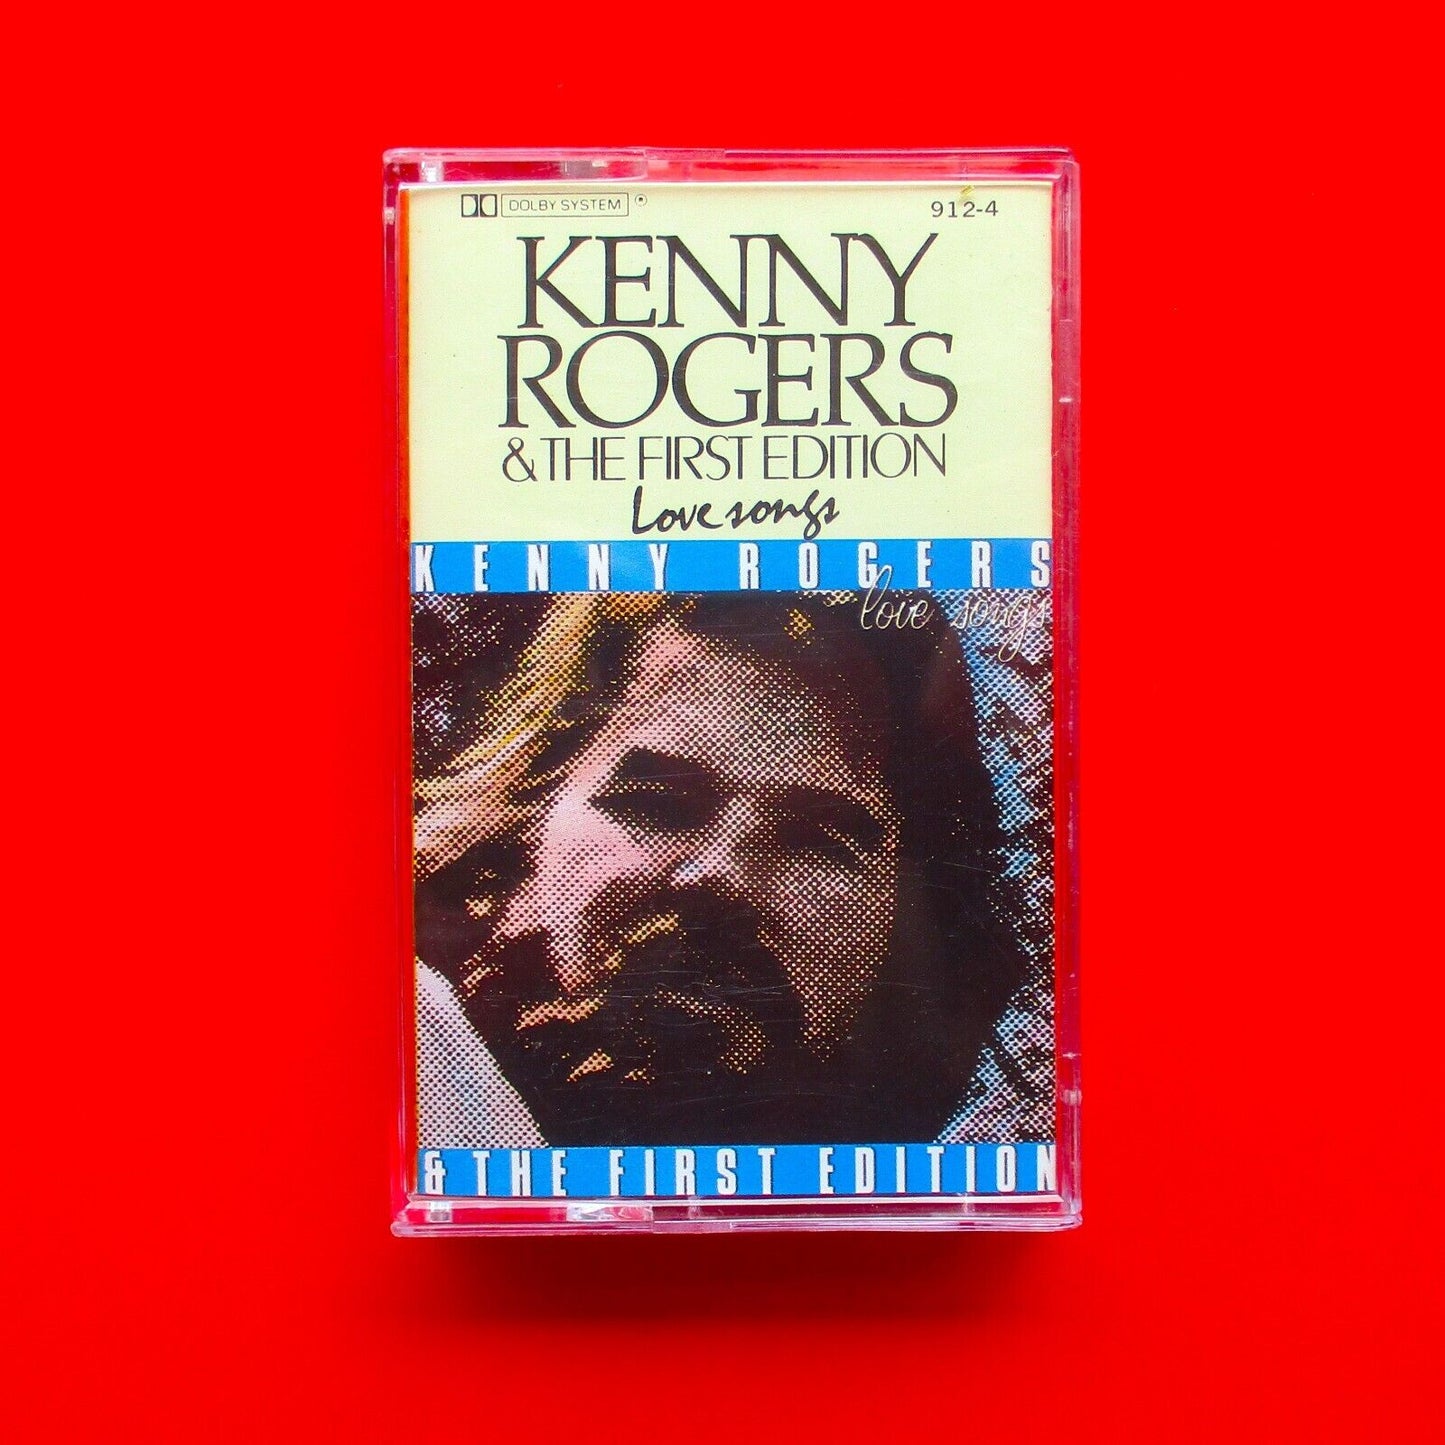 Kenny Rogers & The First Edition Love Songs Australian 1984 Cassette Album